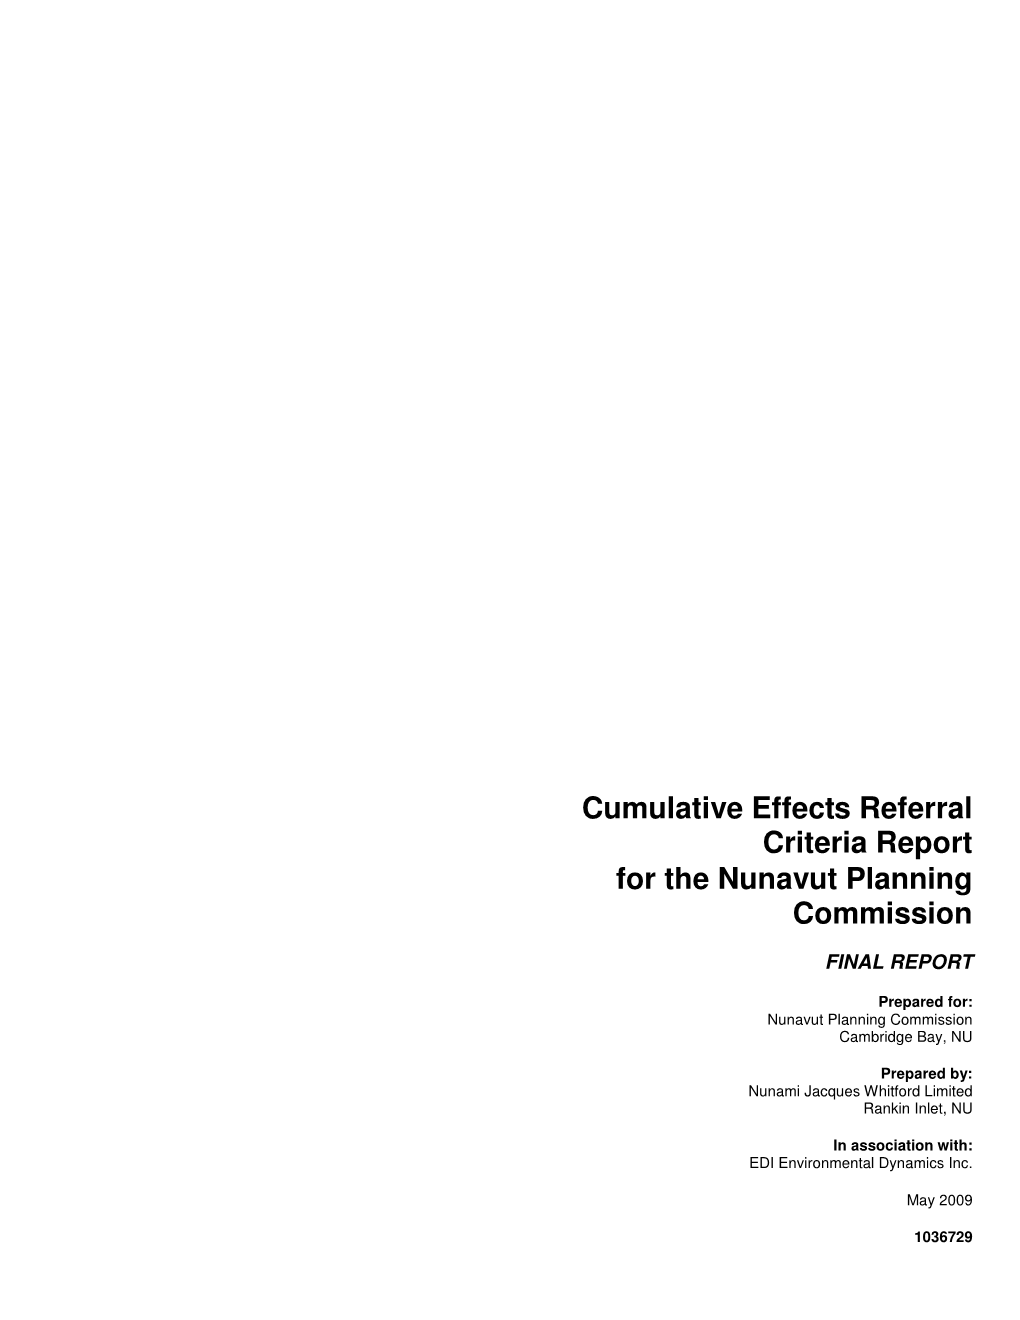 Cumulative Effects Referral Criteria Report for the Nunavut Planning Commission